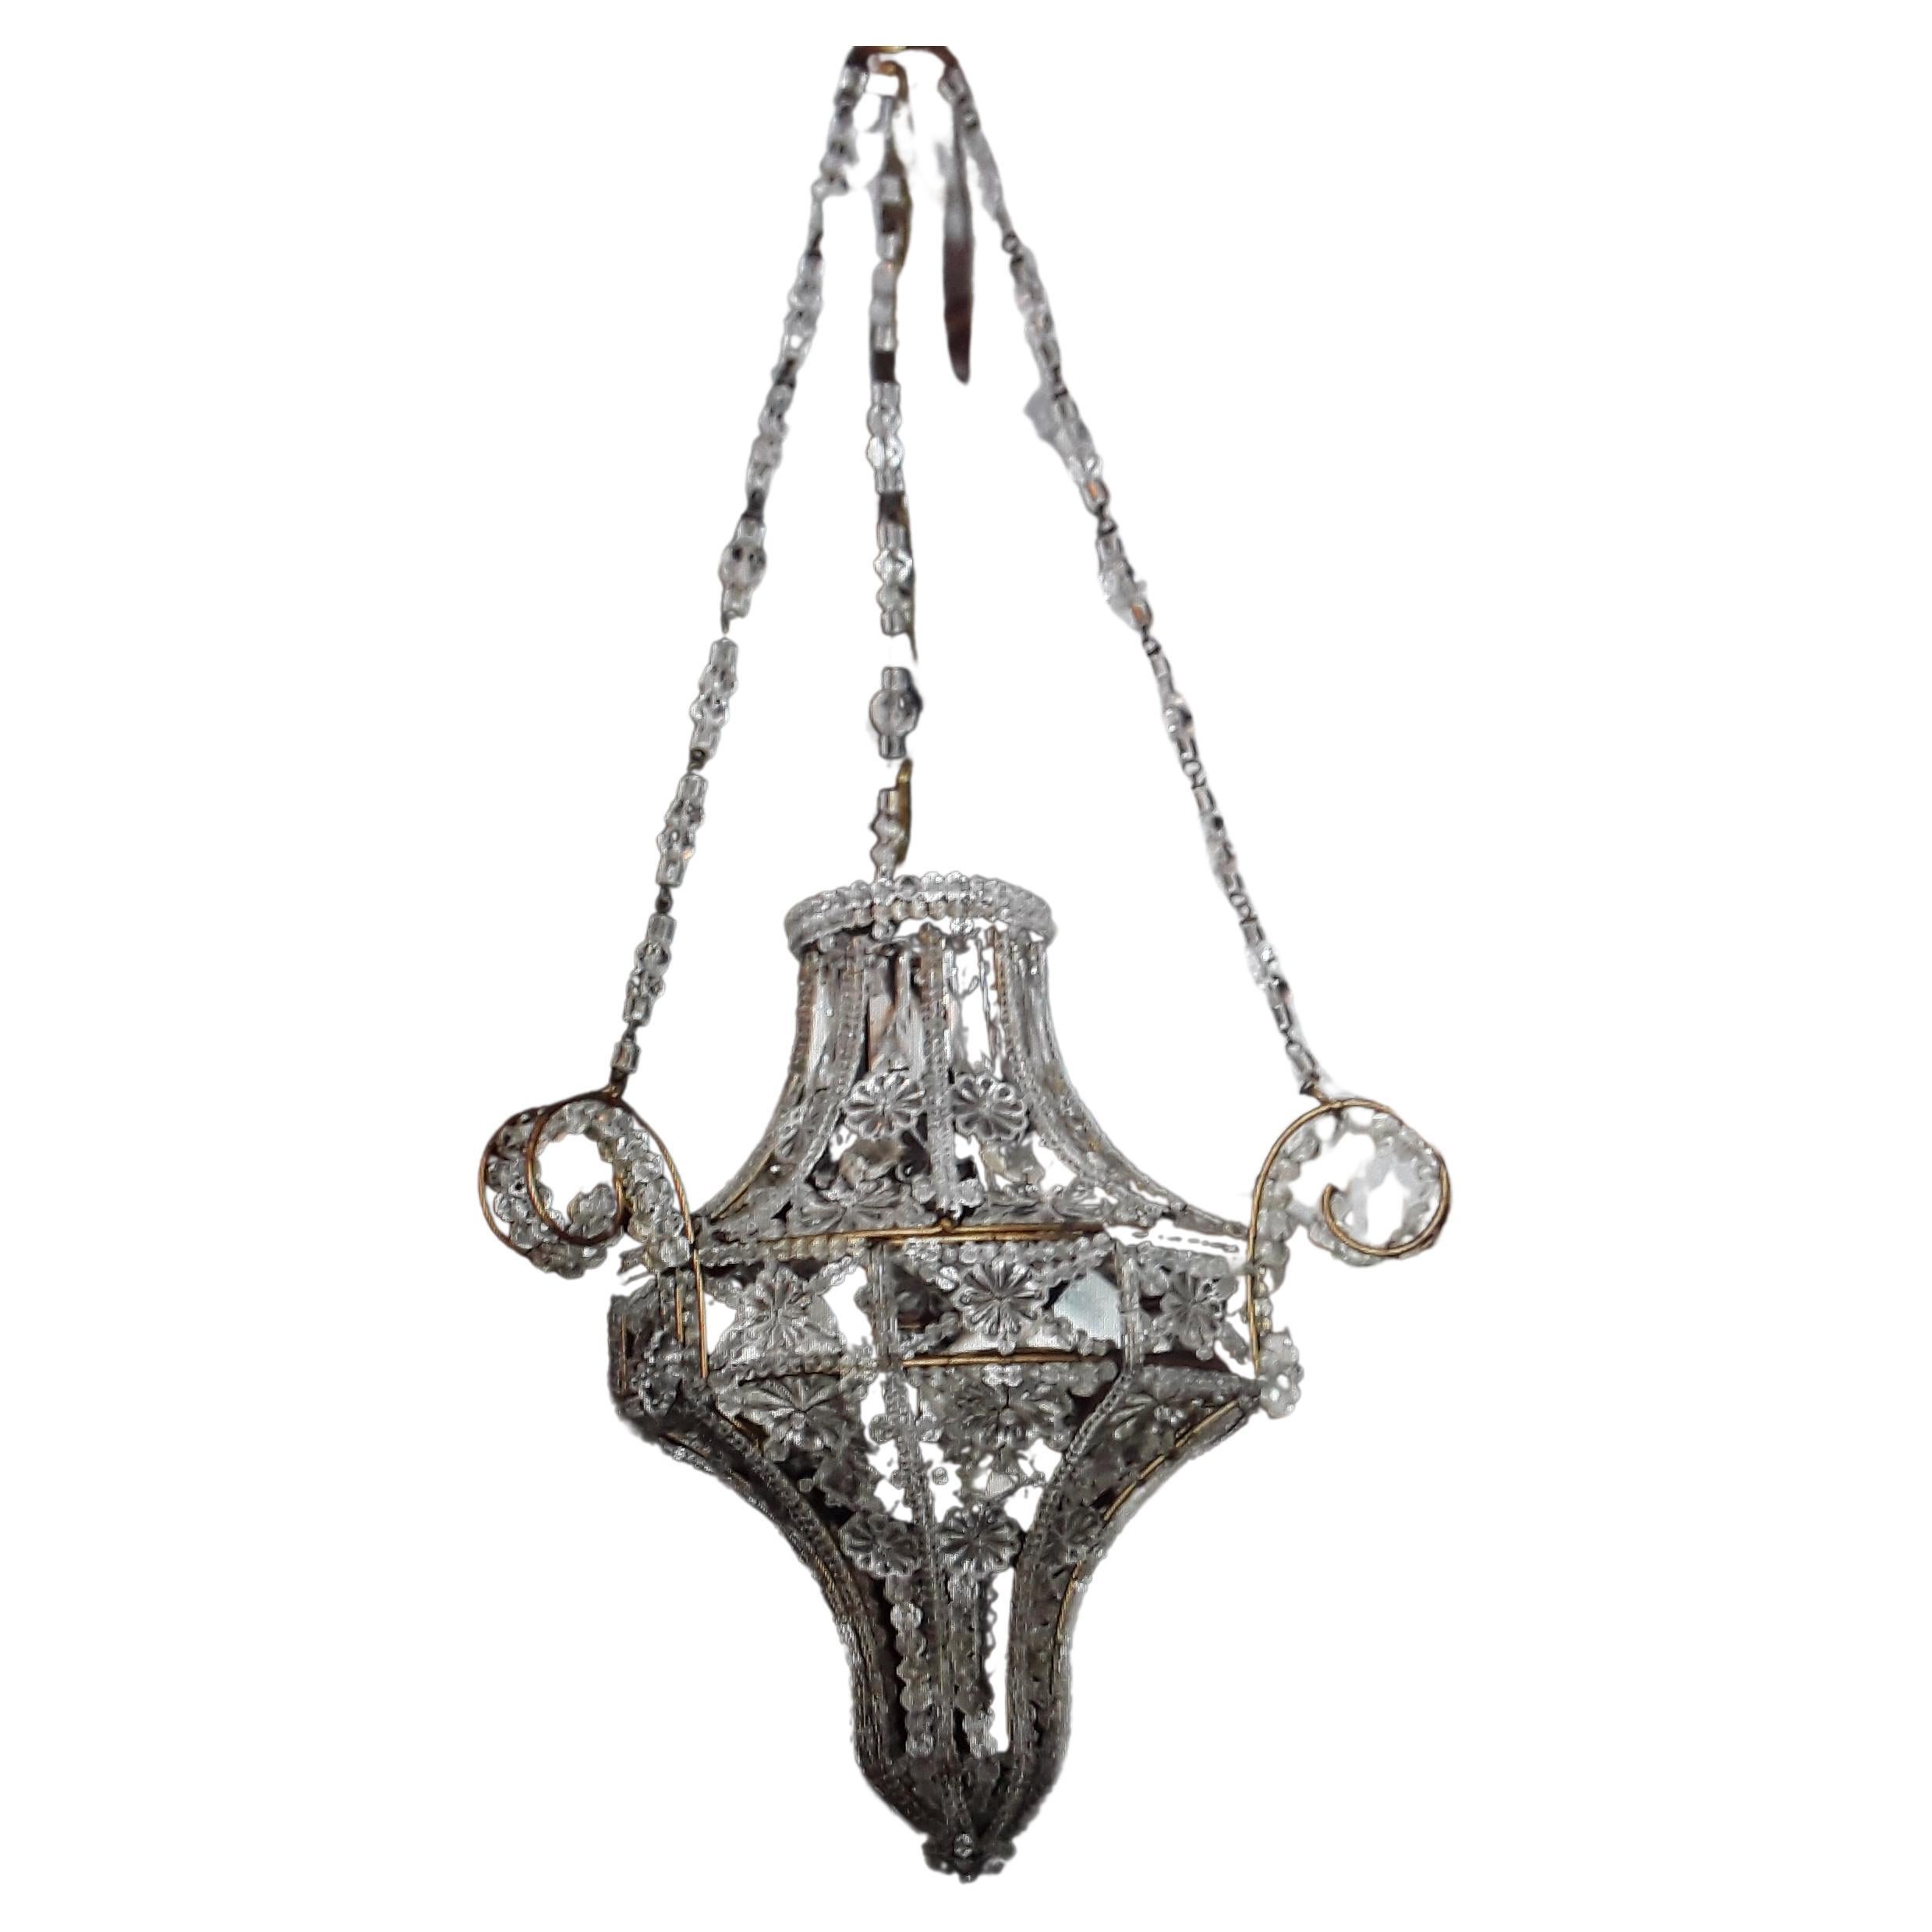 1940's French Hollywood Regency Crystal Beaded Lanter Ceiling Fixture att Bagues In Good Condition For Sale In Opa Locka, FL